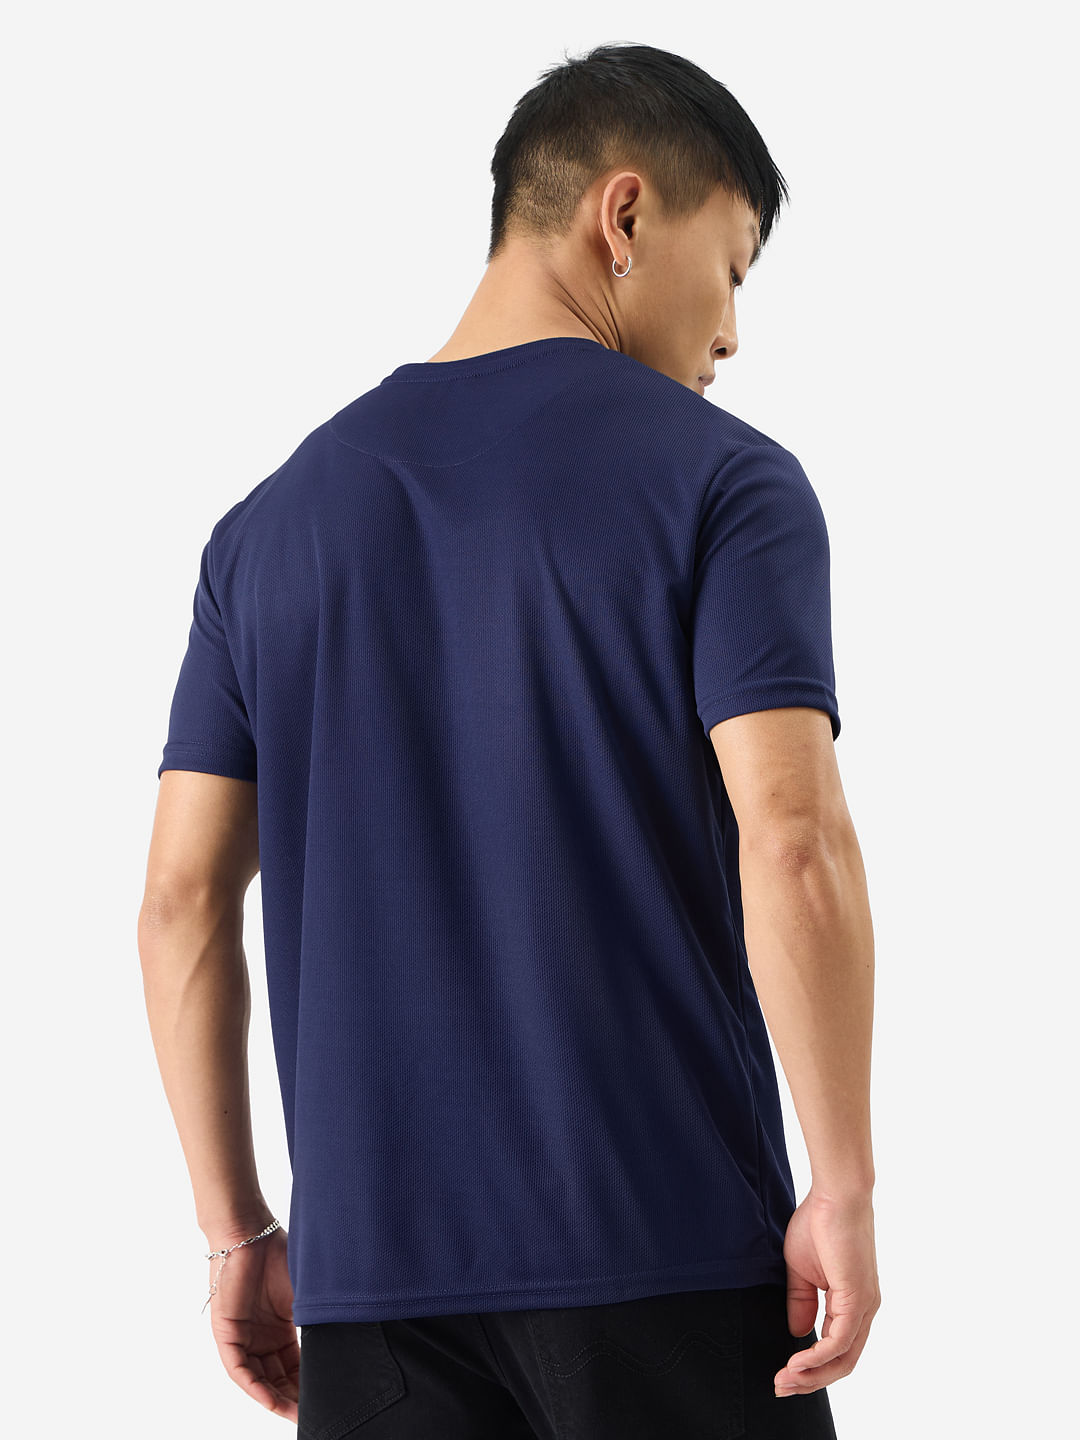 Buy Solid: Navy Dot T-Shirts Online